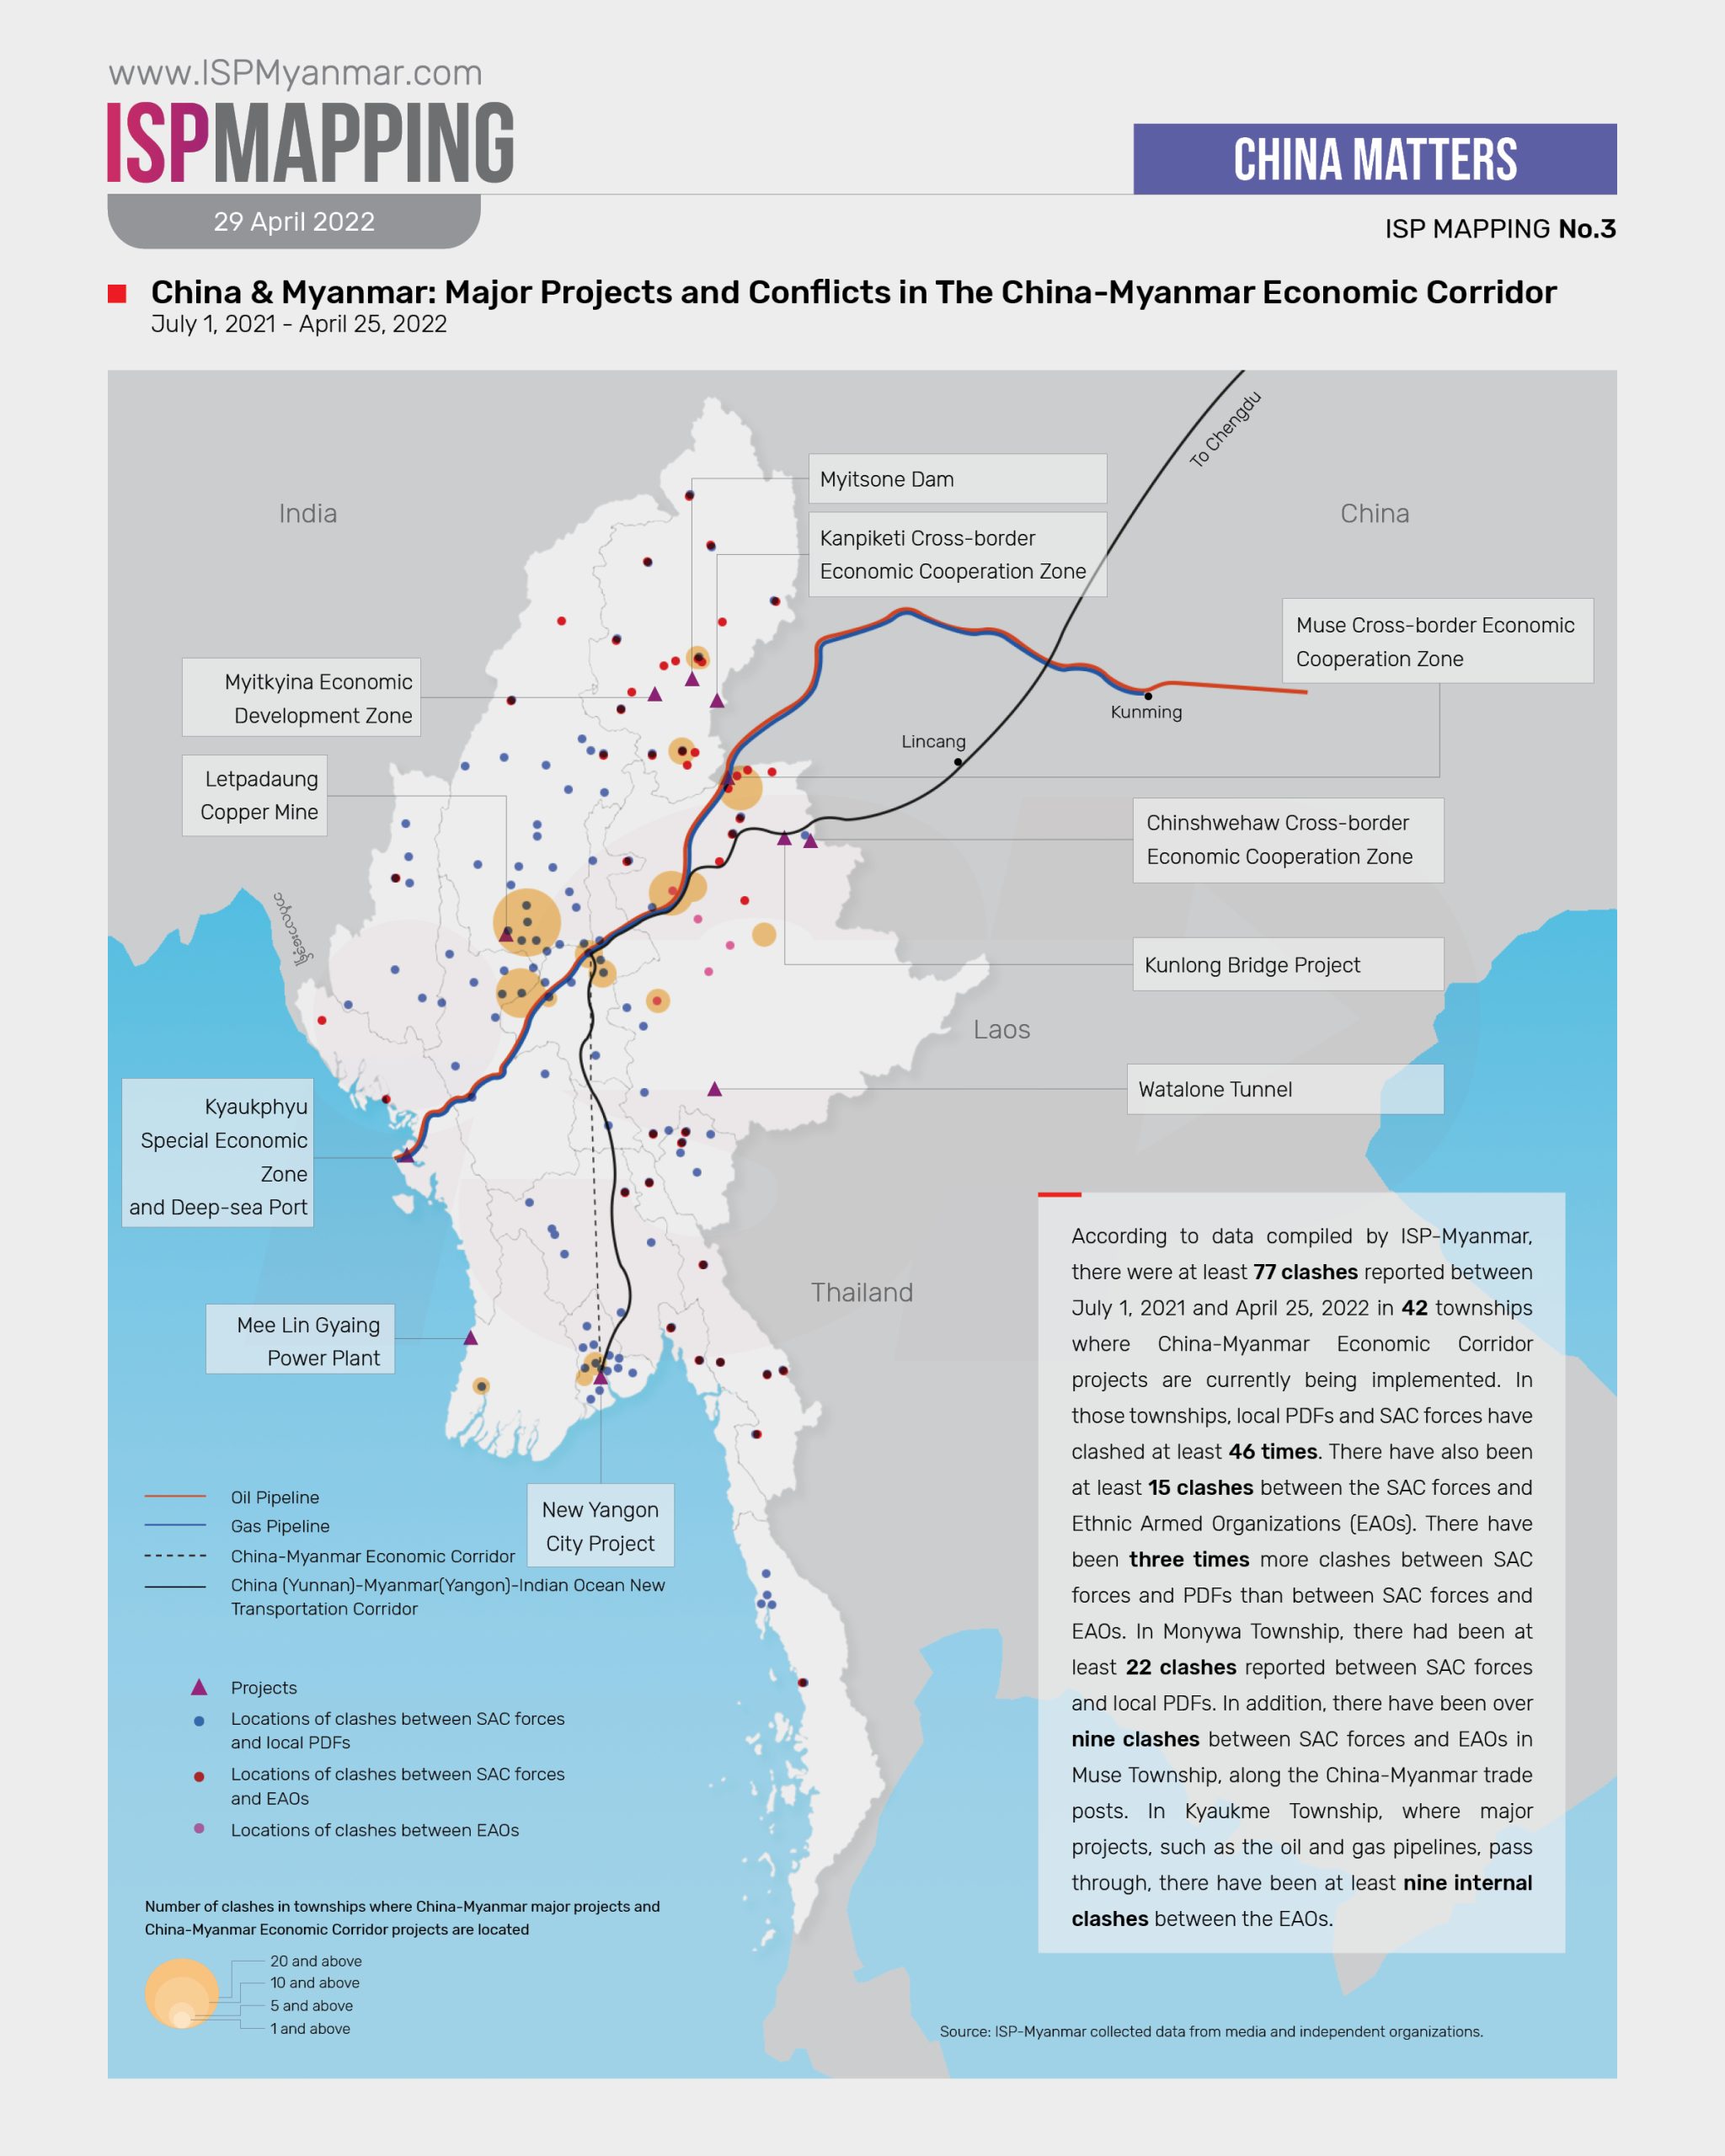 China & Myanmar Major Projects and Conflicts in the China-Myanmar Economic Corridor